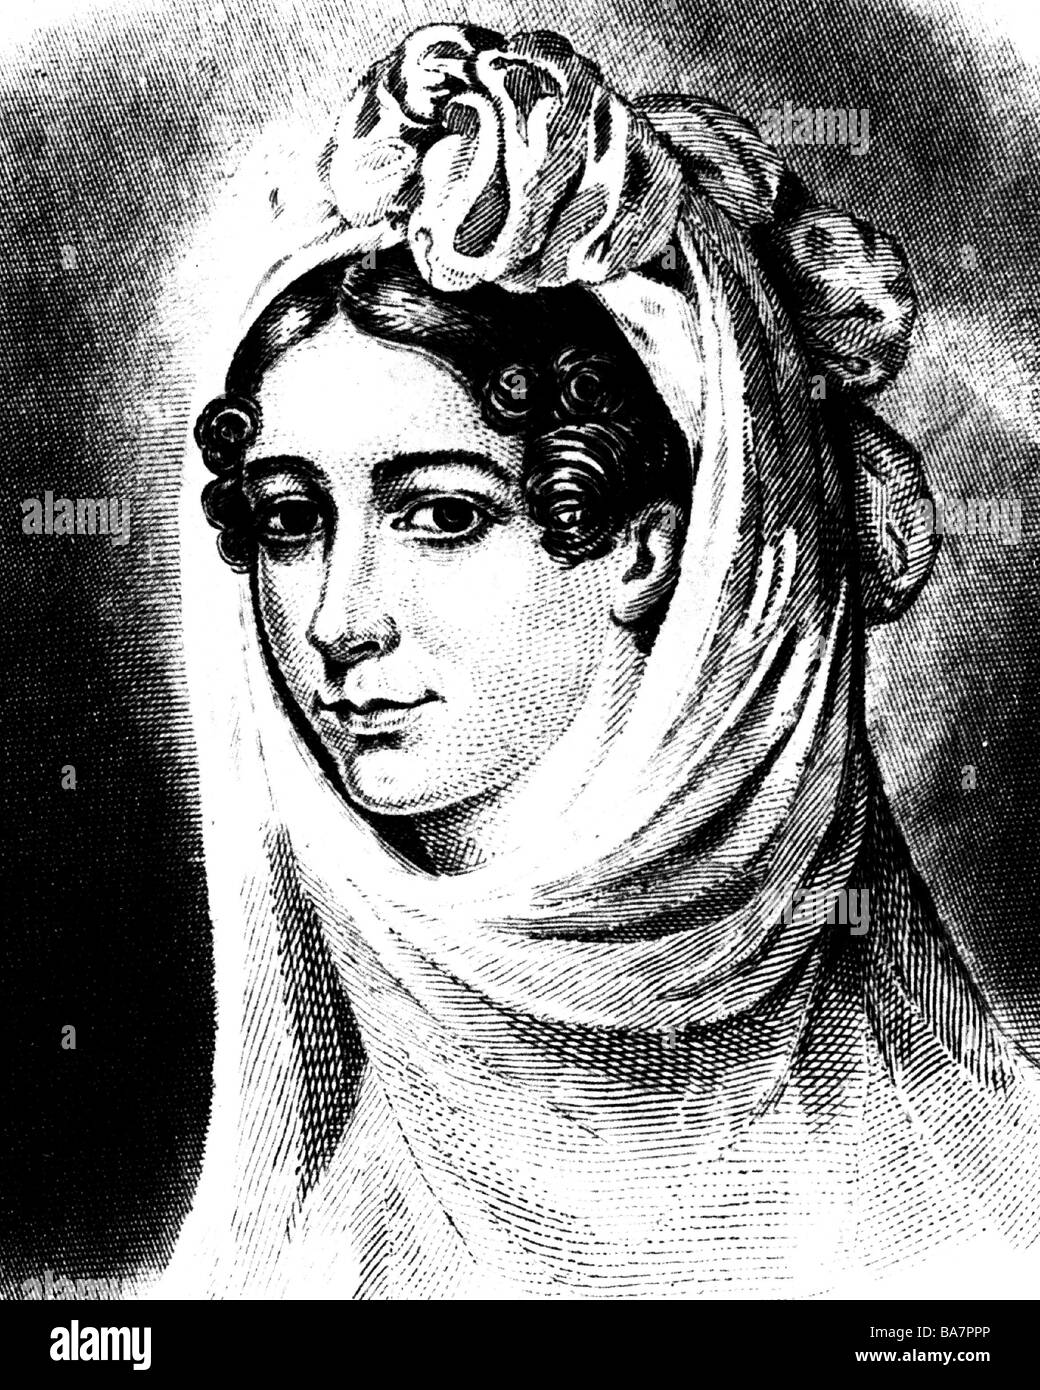 Stowe, Harriet Elizabeth Beecher, 14.6.1811 - 1.7.1896, US author / writer, as young woman, portrait, wood engraving, circa 1825, Stock Photo